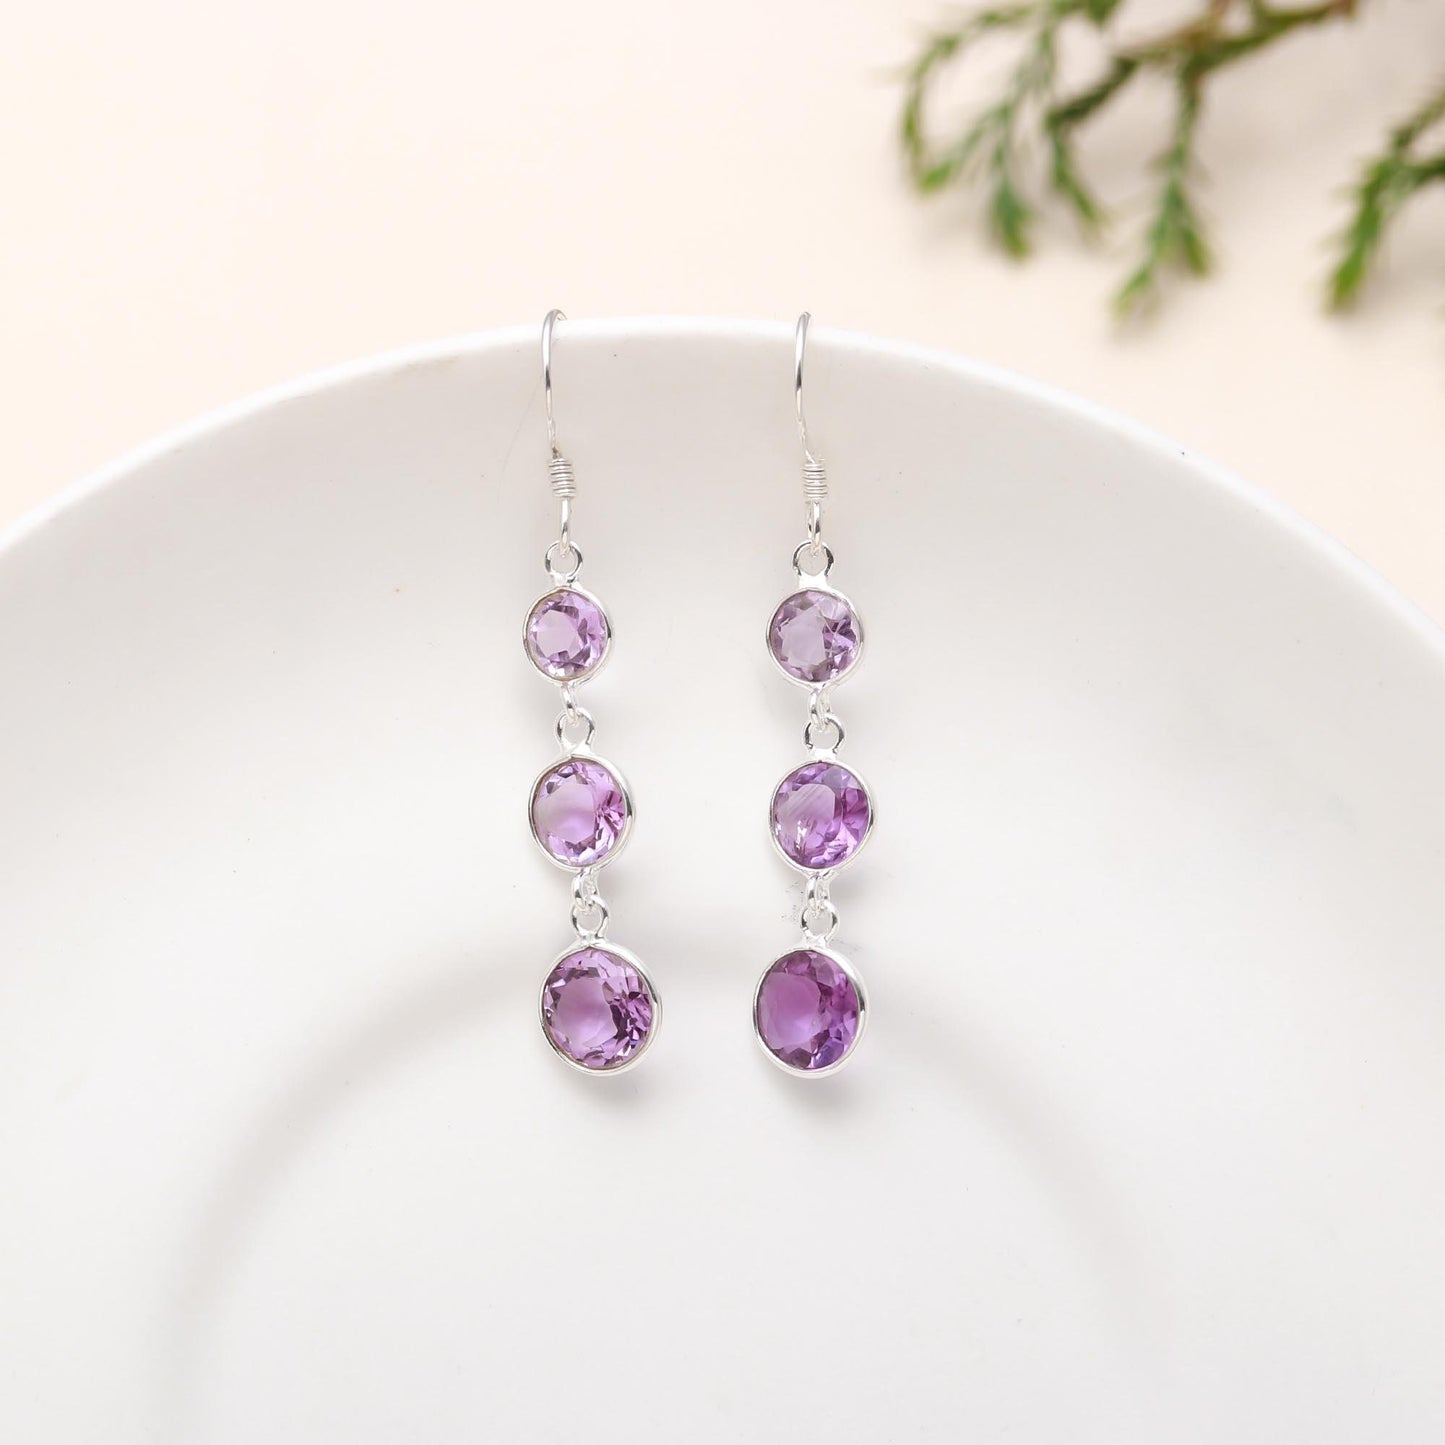 Amethyst Earring in Dangle Earwire, Birthday, Anniversary, Women, Teenager/ Girls, Gift for her. Quirky / Dainty Solid 925 Sterling Silver